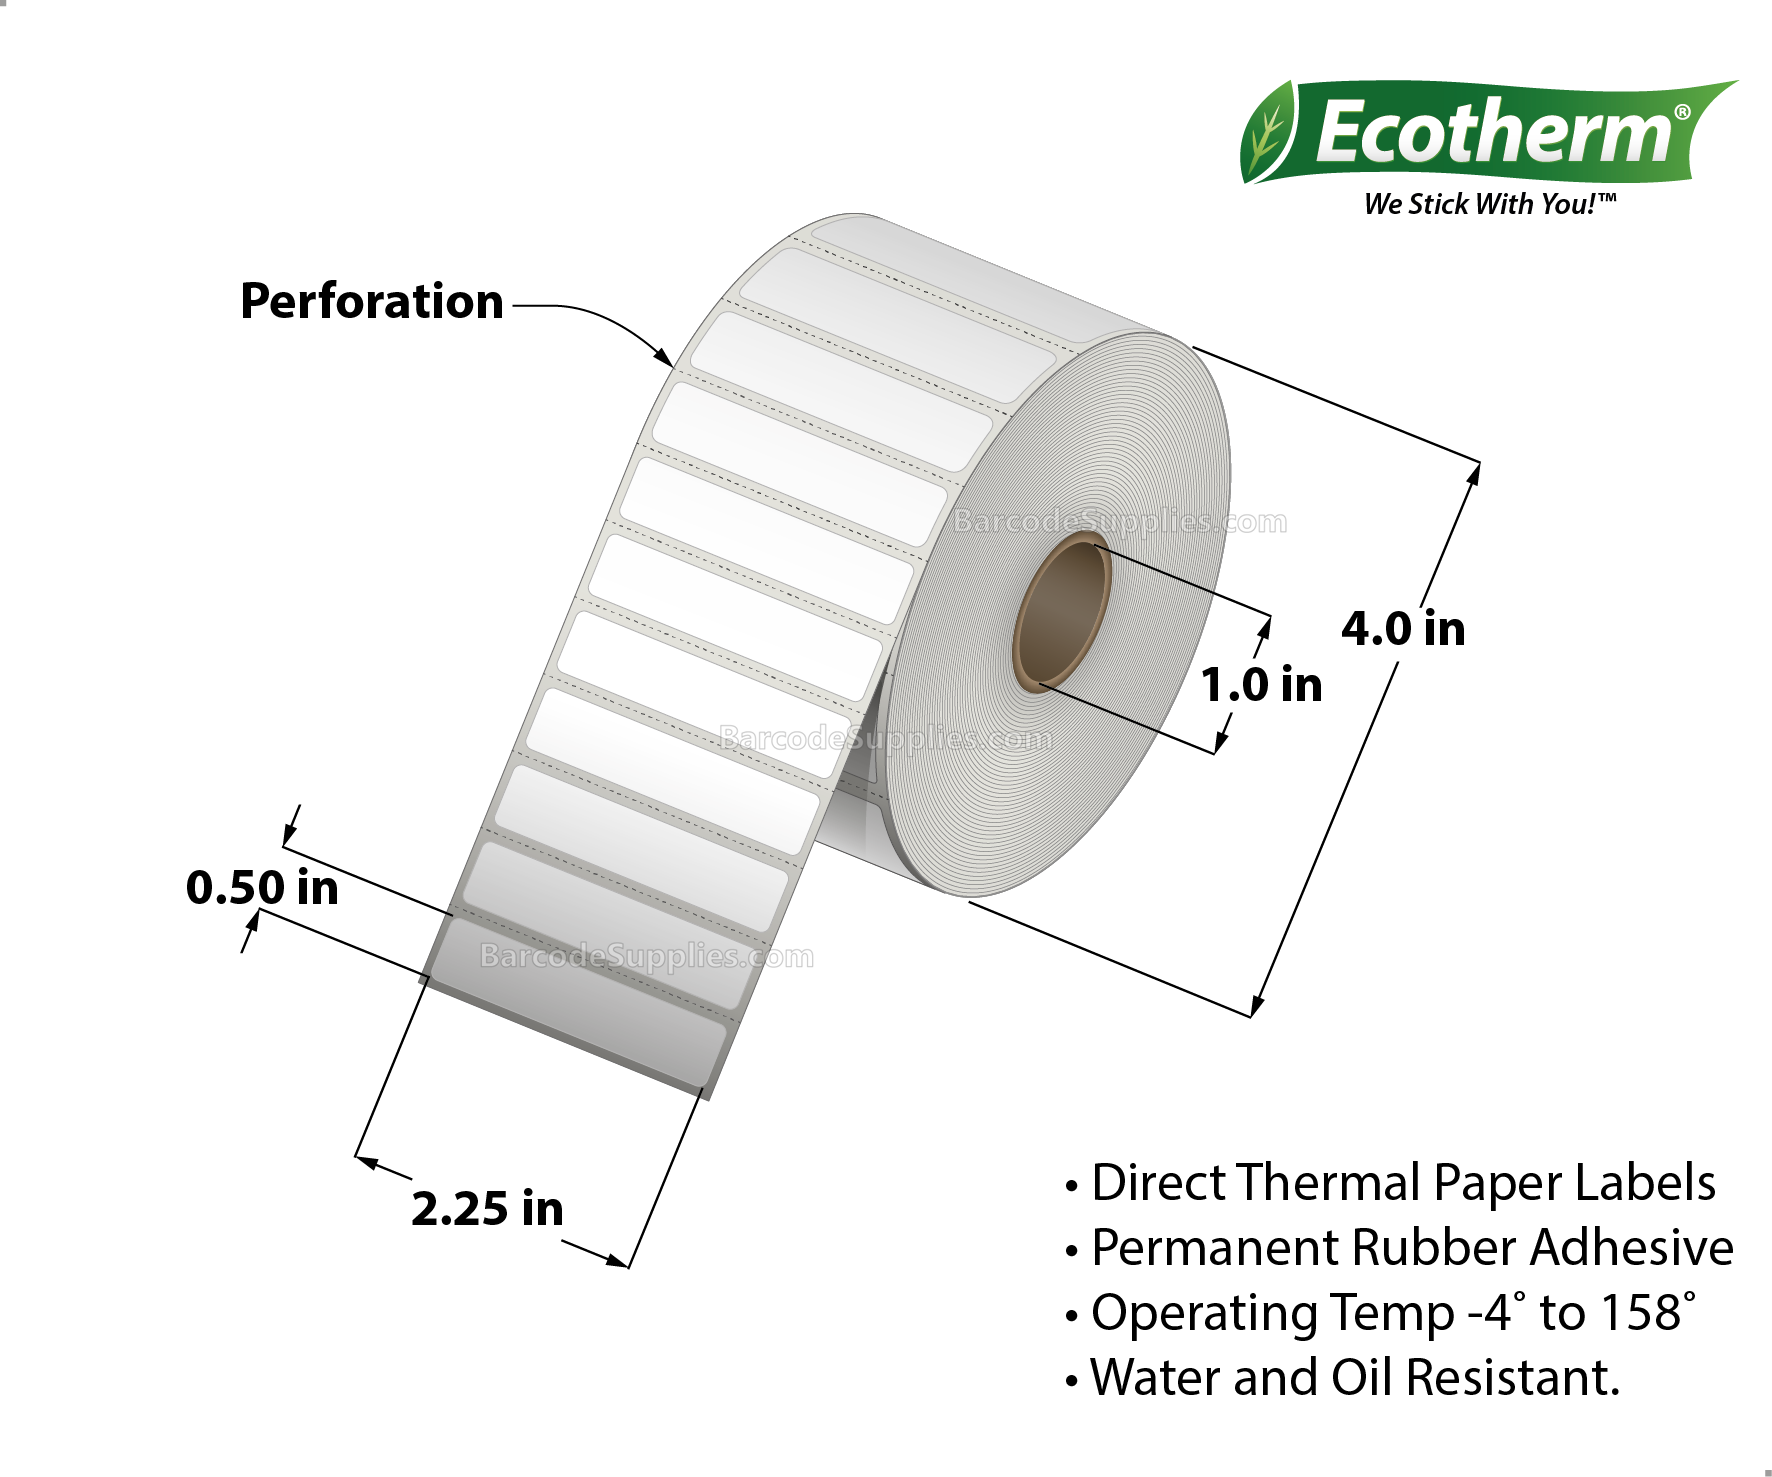 2.25 x 0.5 Direct Thermal White Labels With Rubber Adhesive - Perforated - 3460 Labels Per Roll - Carton Of 4 Rolls - 13840 Labels Total - MPN: ECOTHERM14134-4